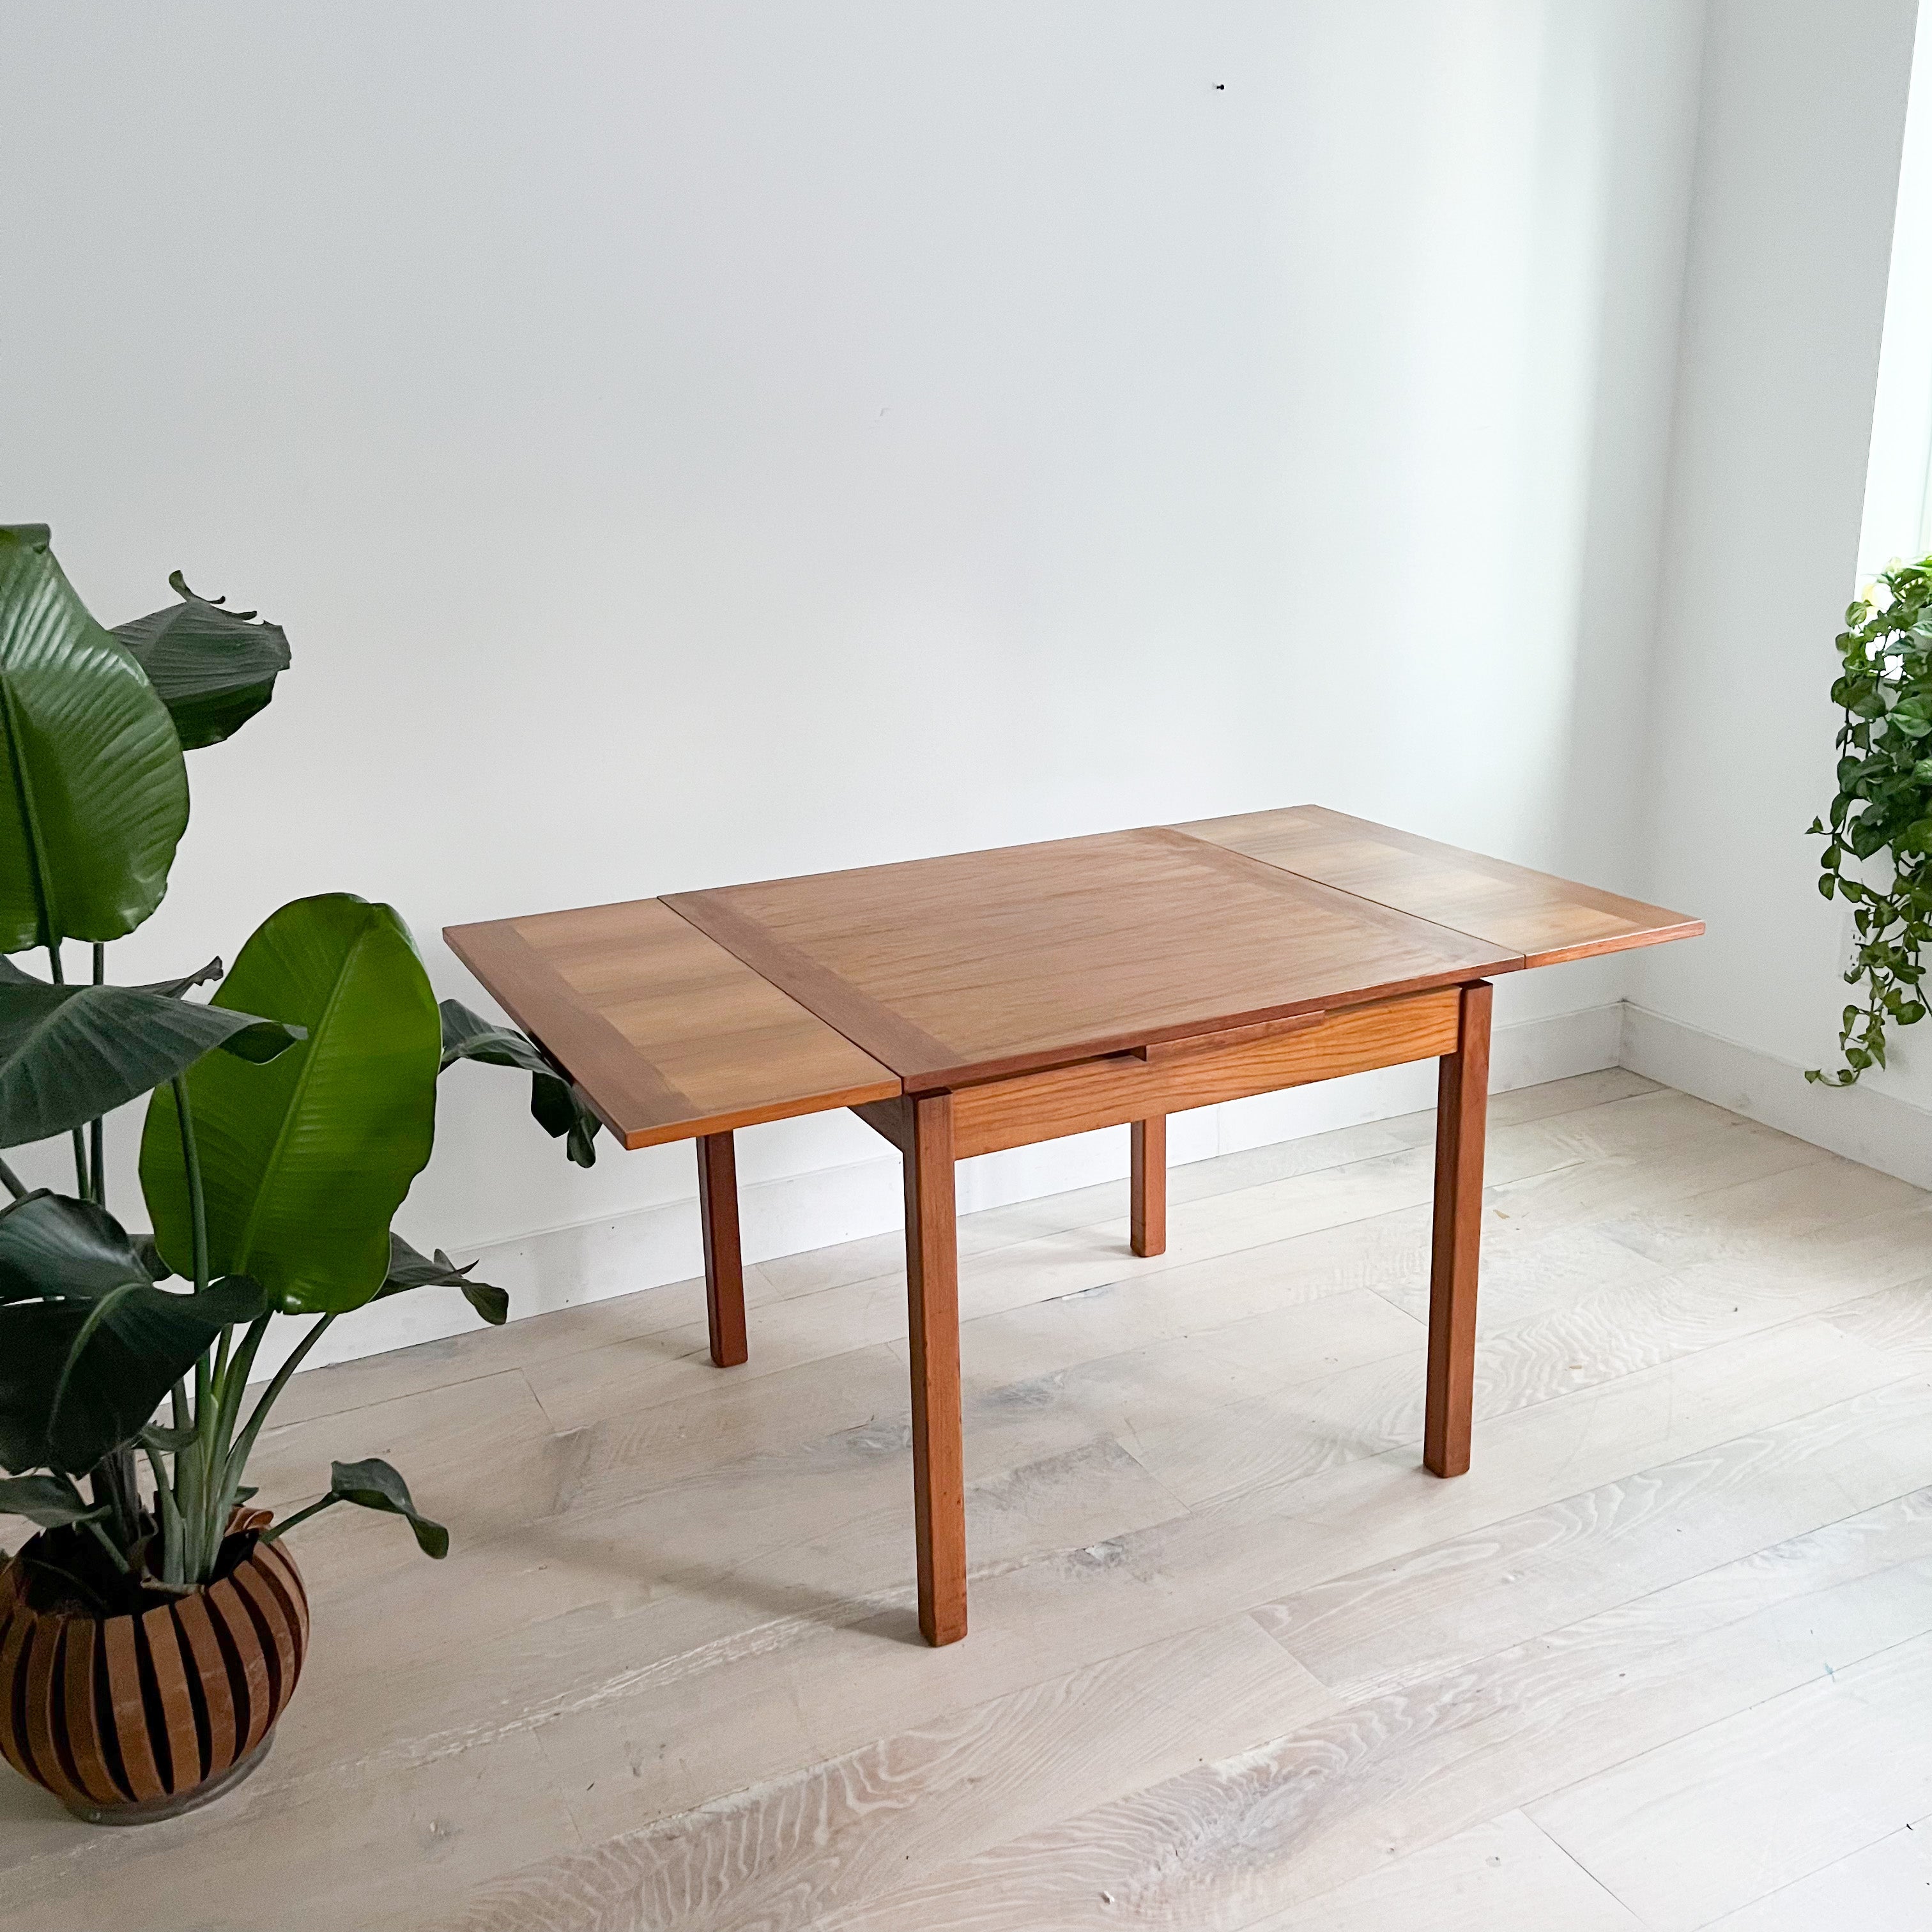 Elevate your dining space with this exquisite Danish teak dining table. Crafted to perfection, its compact 33.5”x33.5” size effortlessly accommodates intimate gatherings.

Condition: The original finish displays subtle scuffing, scratching, and